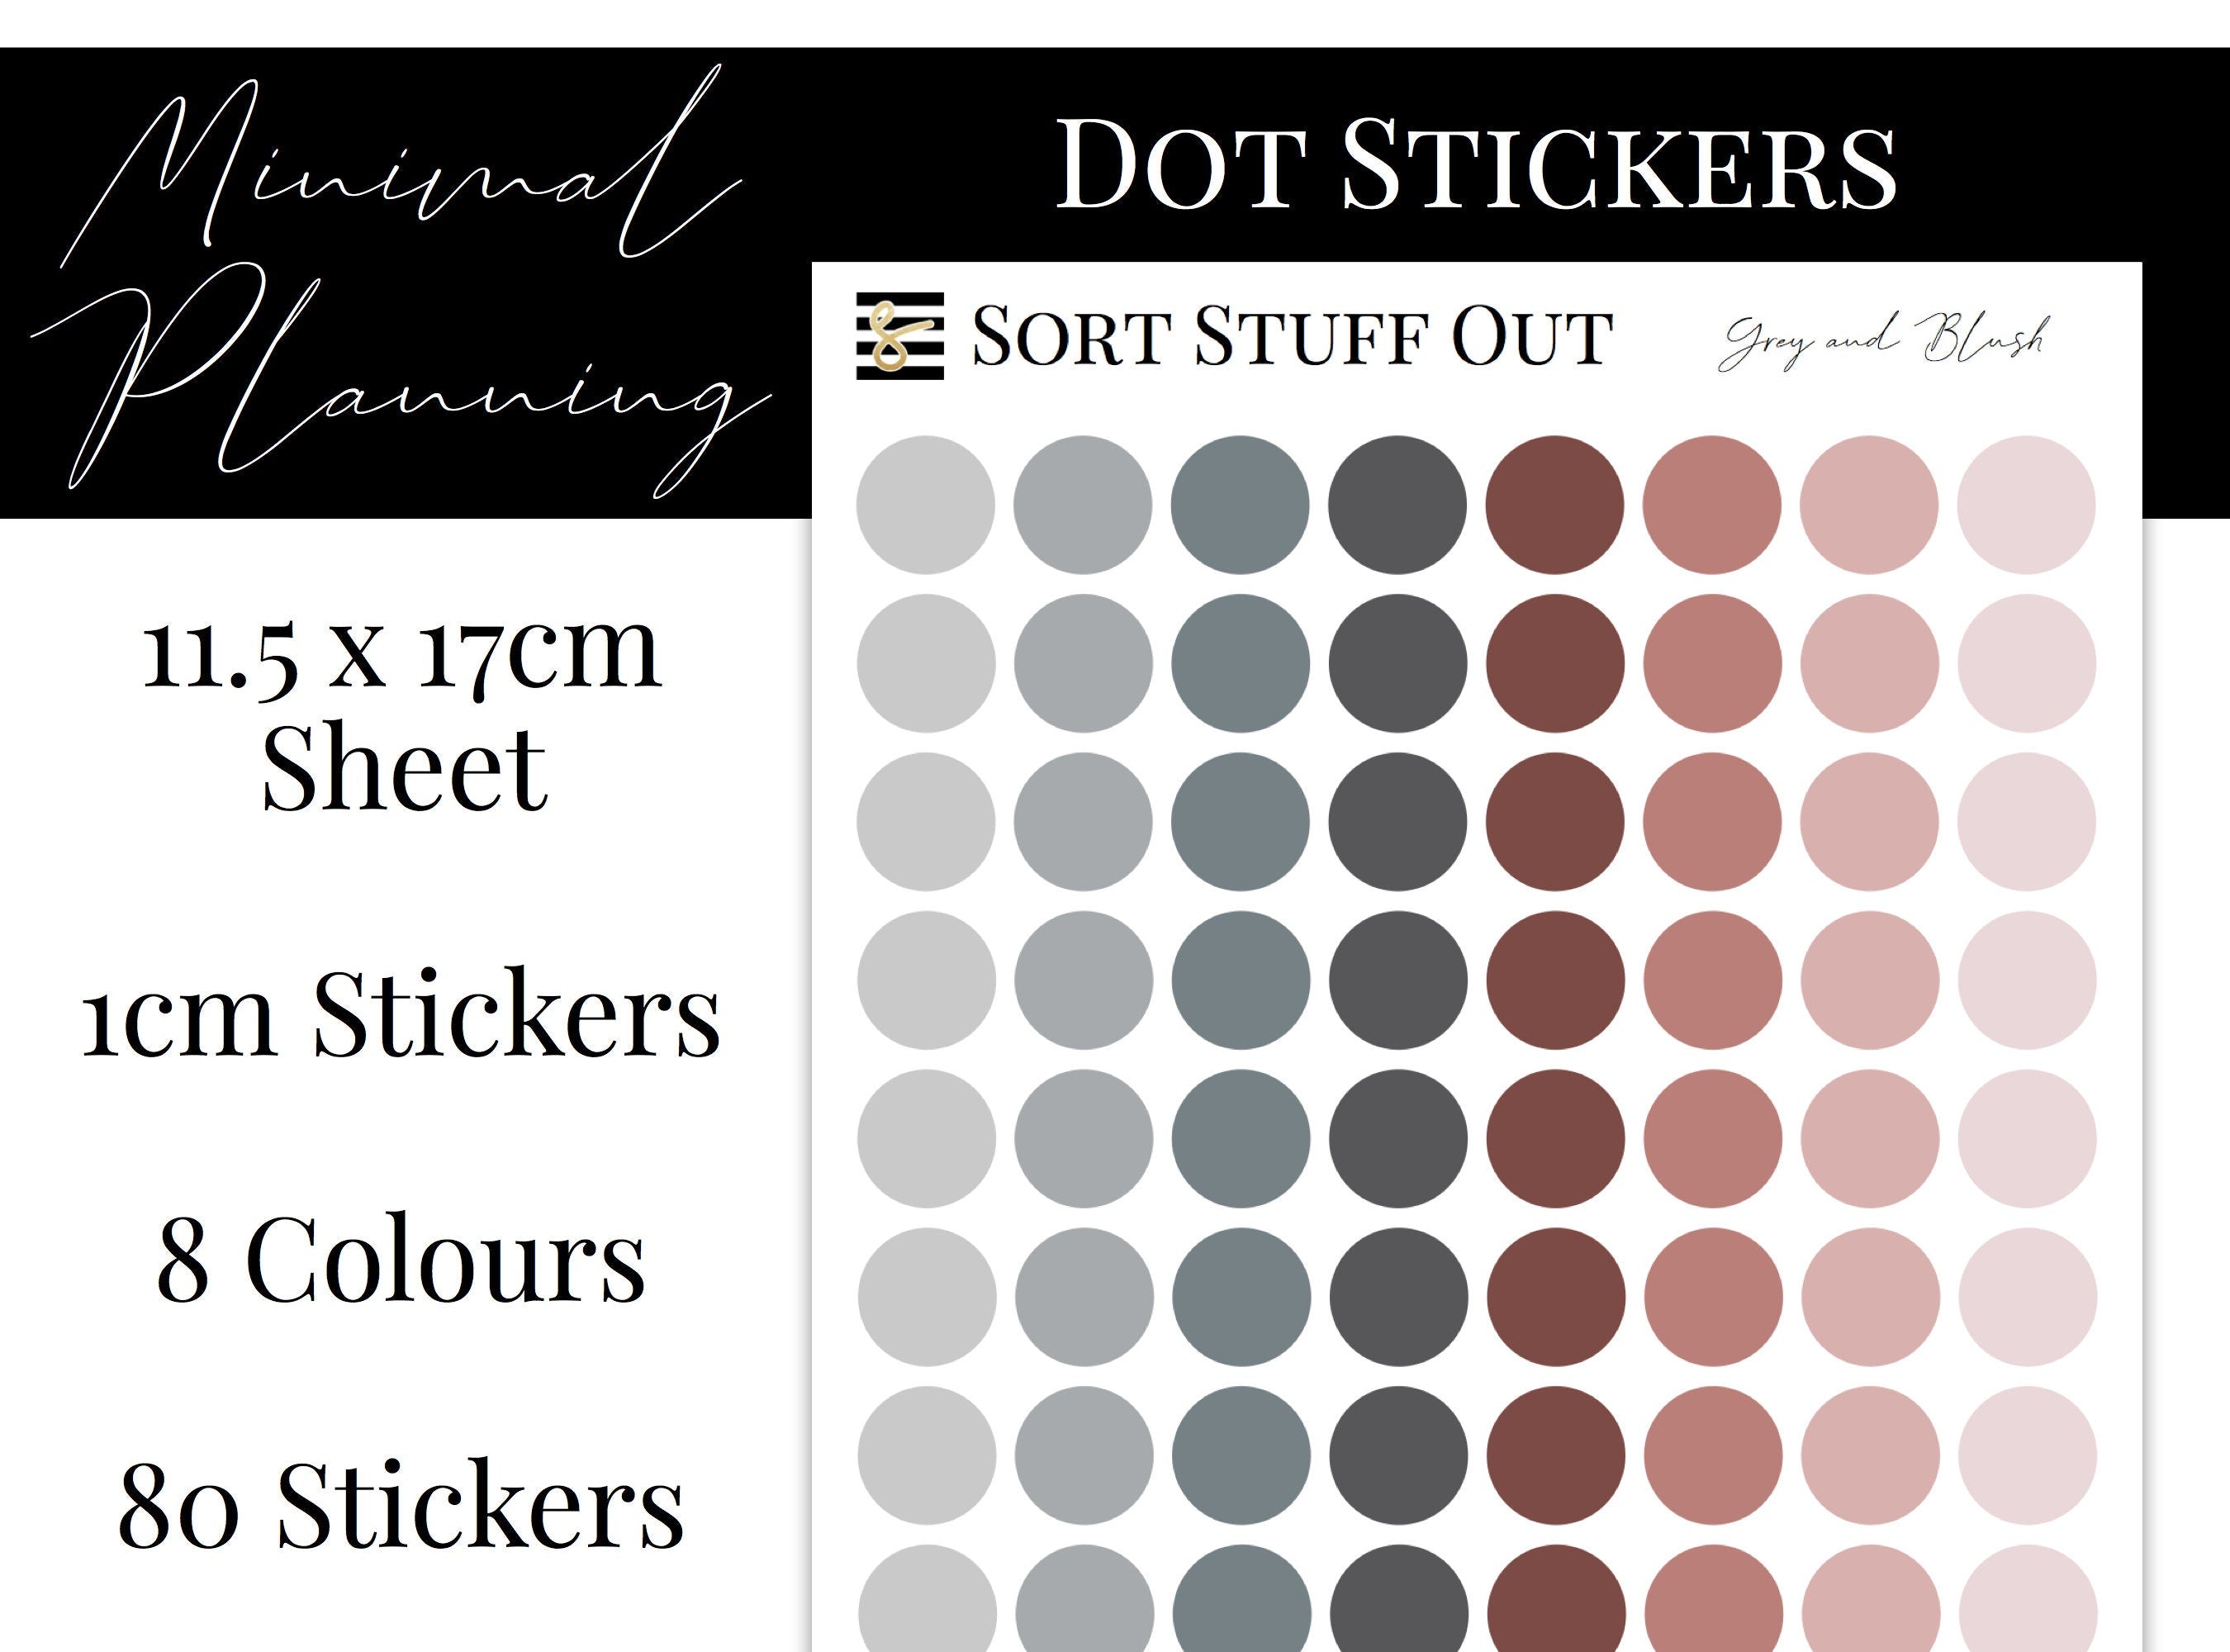 Grey and Blush Planner Dot Stickers